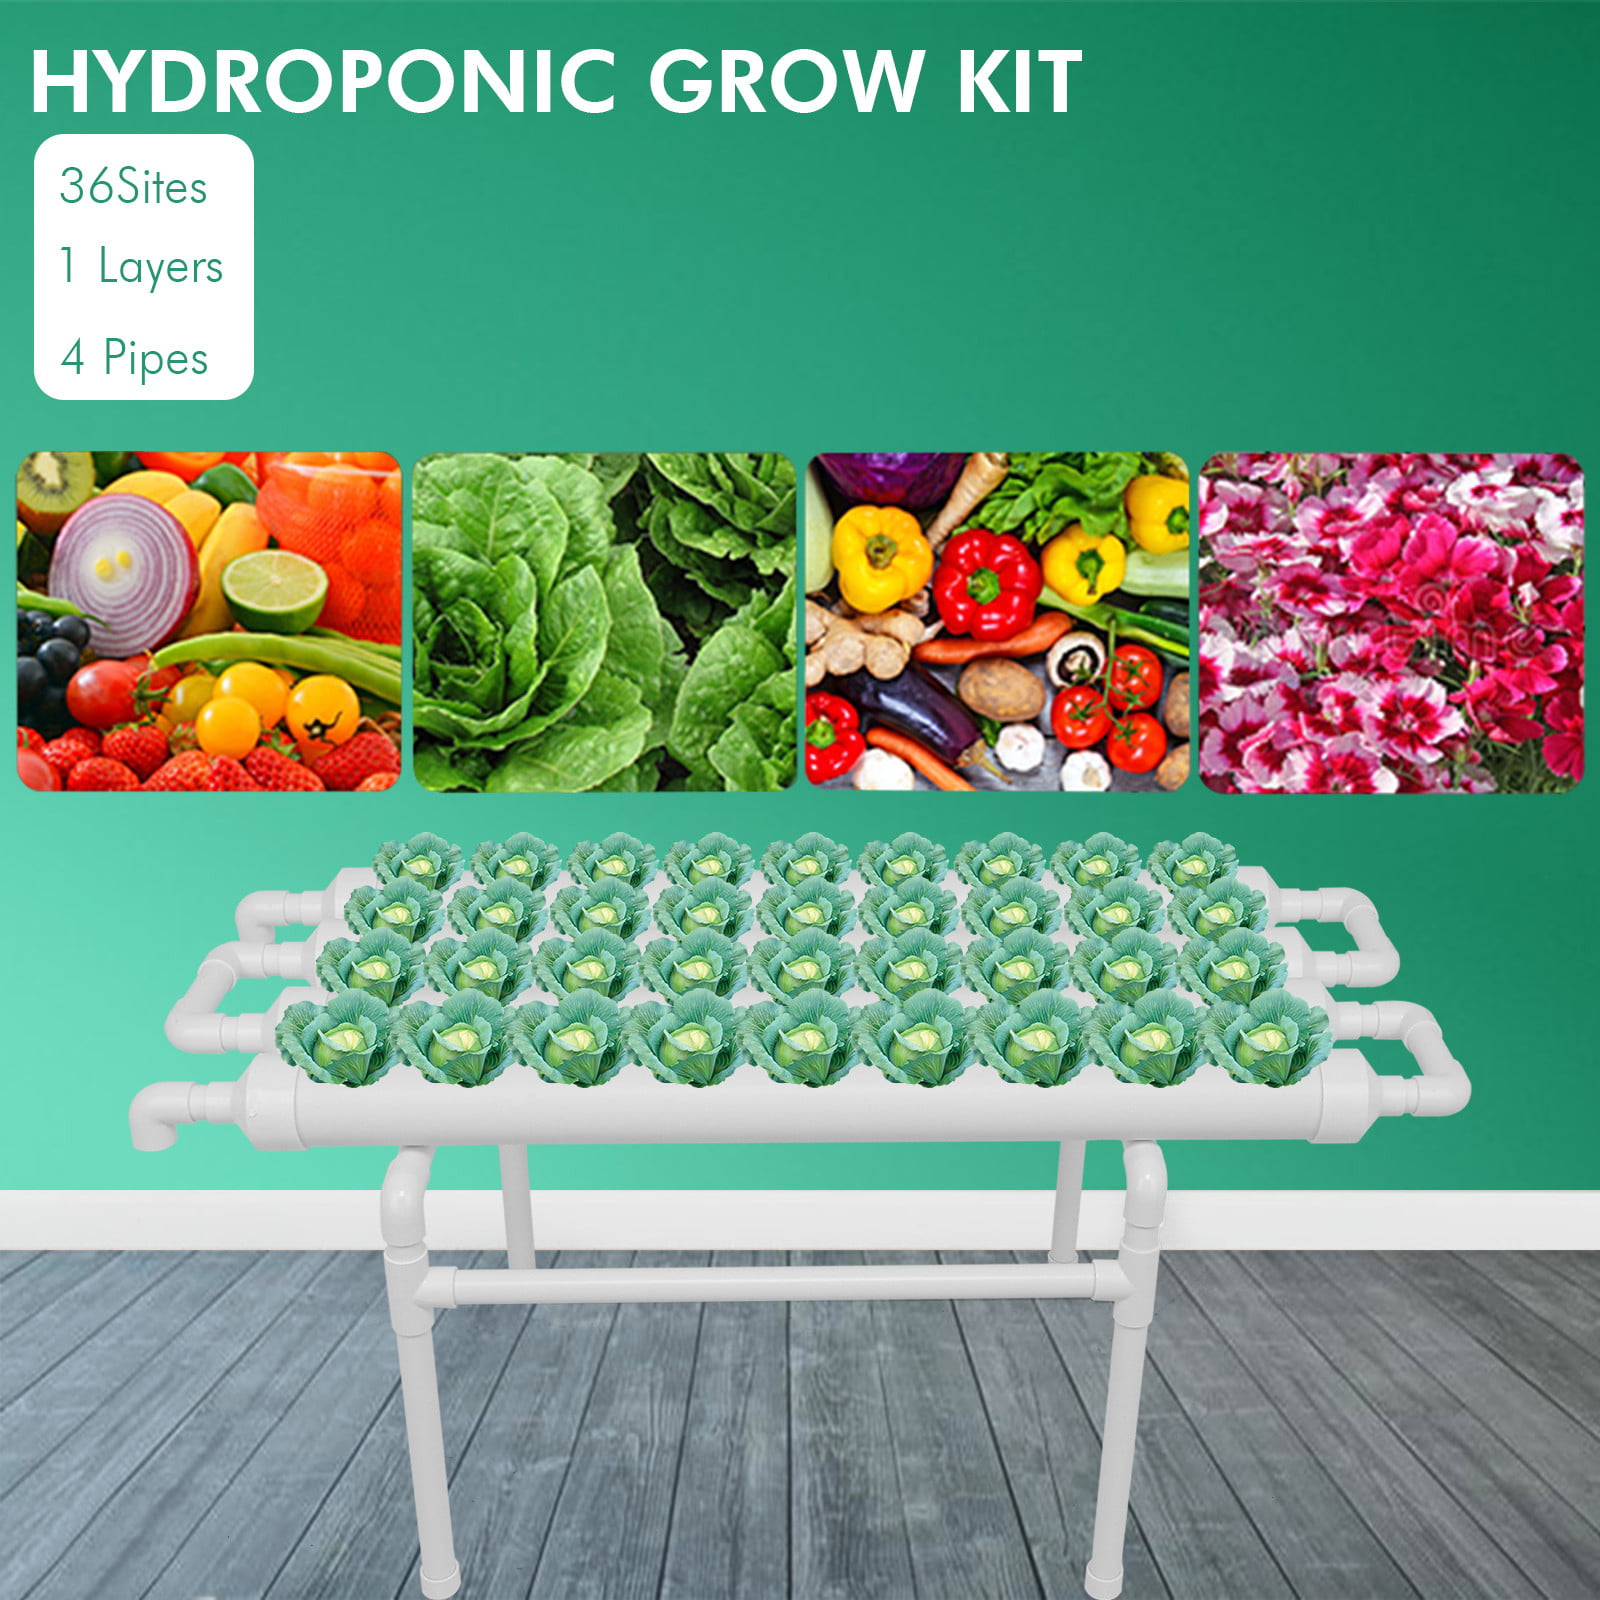 Details about   Hydroponic Grow Kit 36 Plant Sites PVC Pipes Hydroponics Growing System 100-240V 